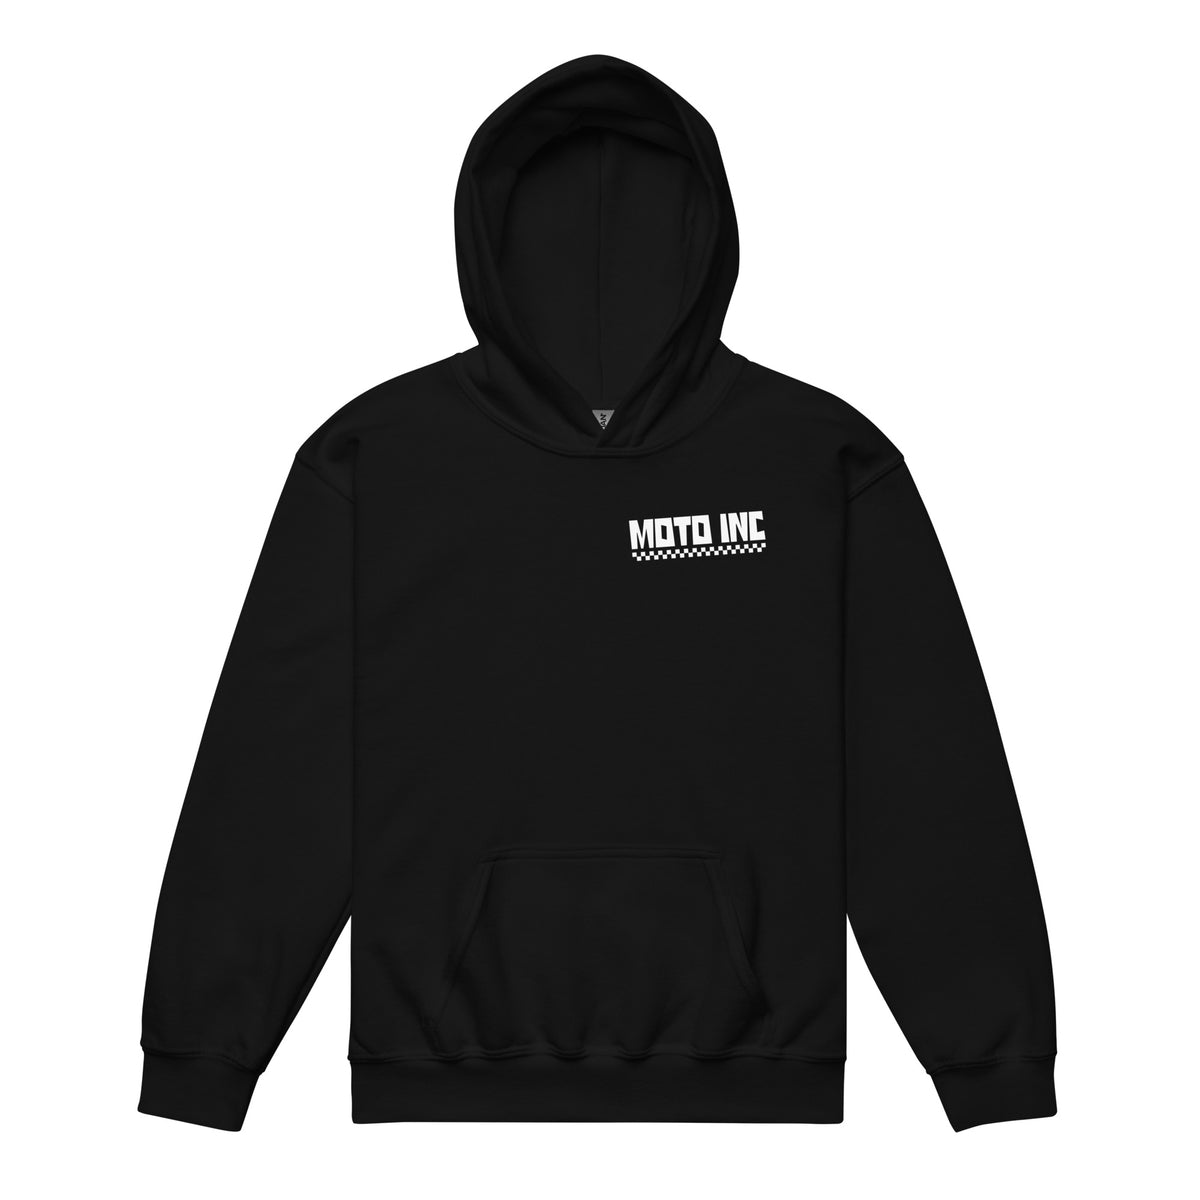 Kids - Casey 313 - The Wall - Hoodie